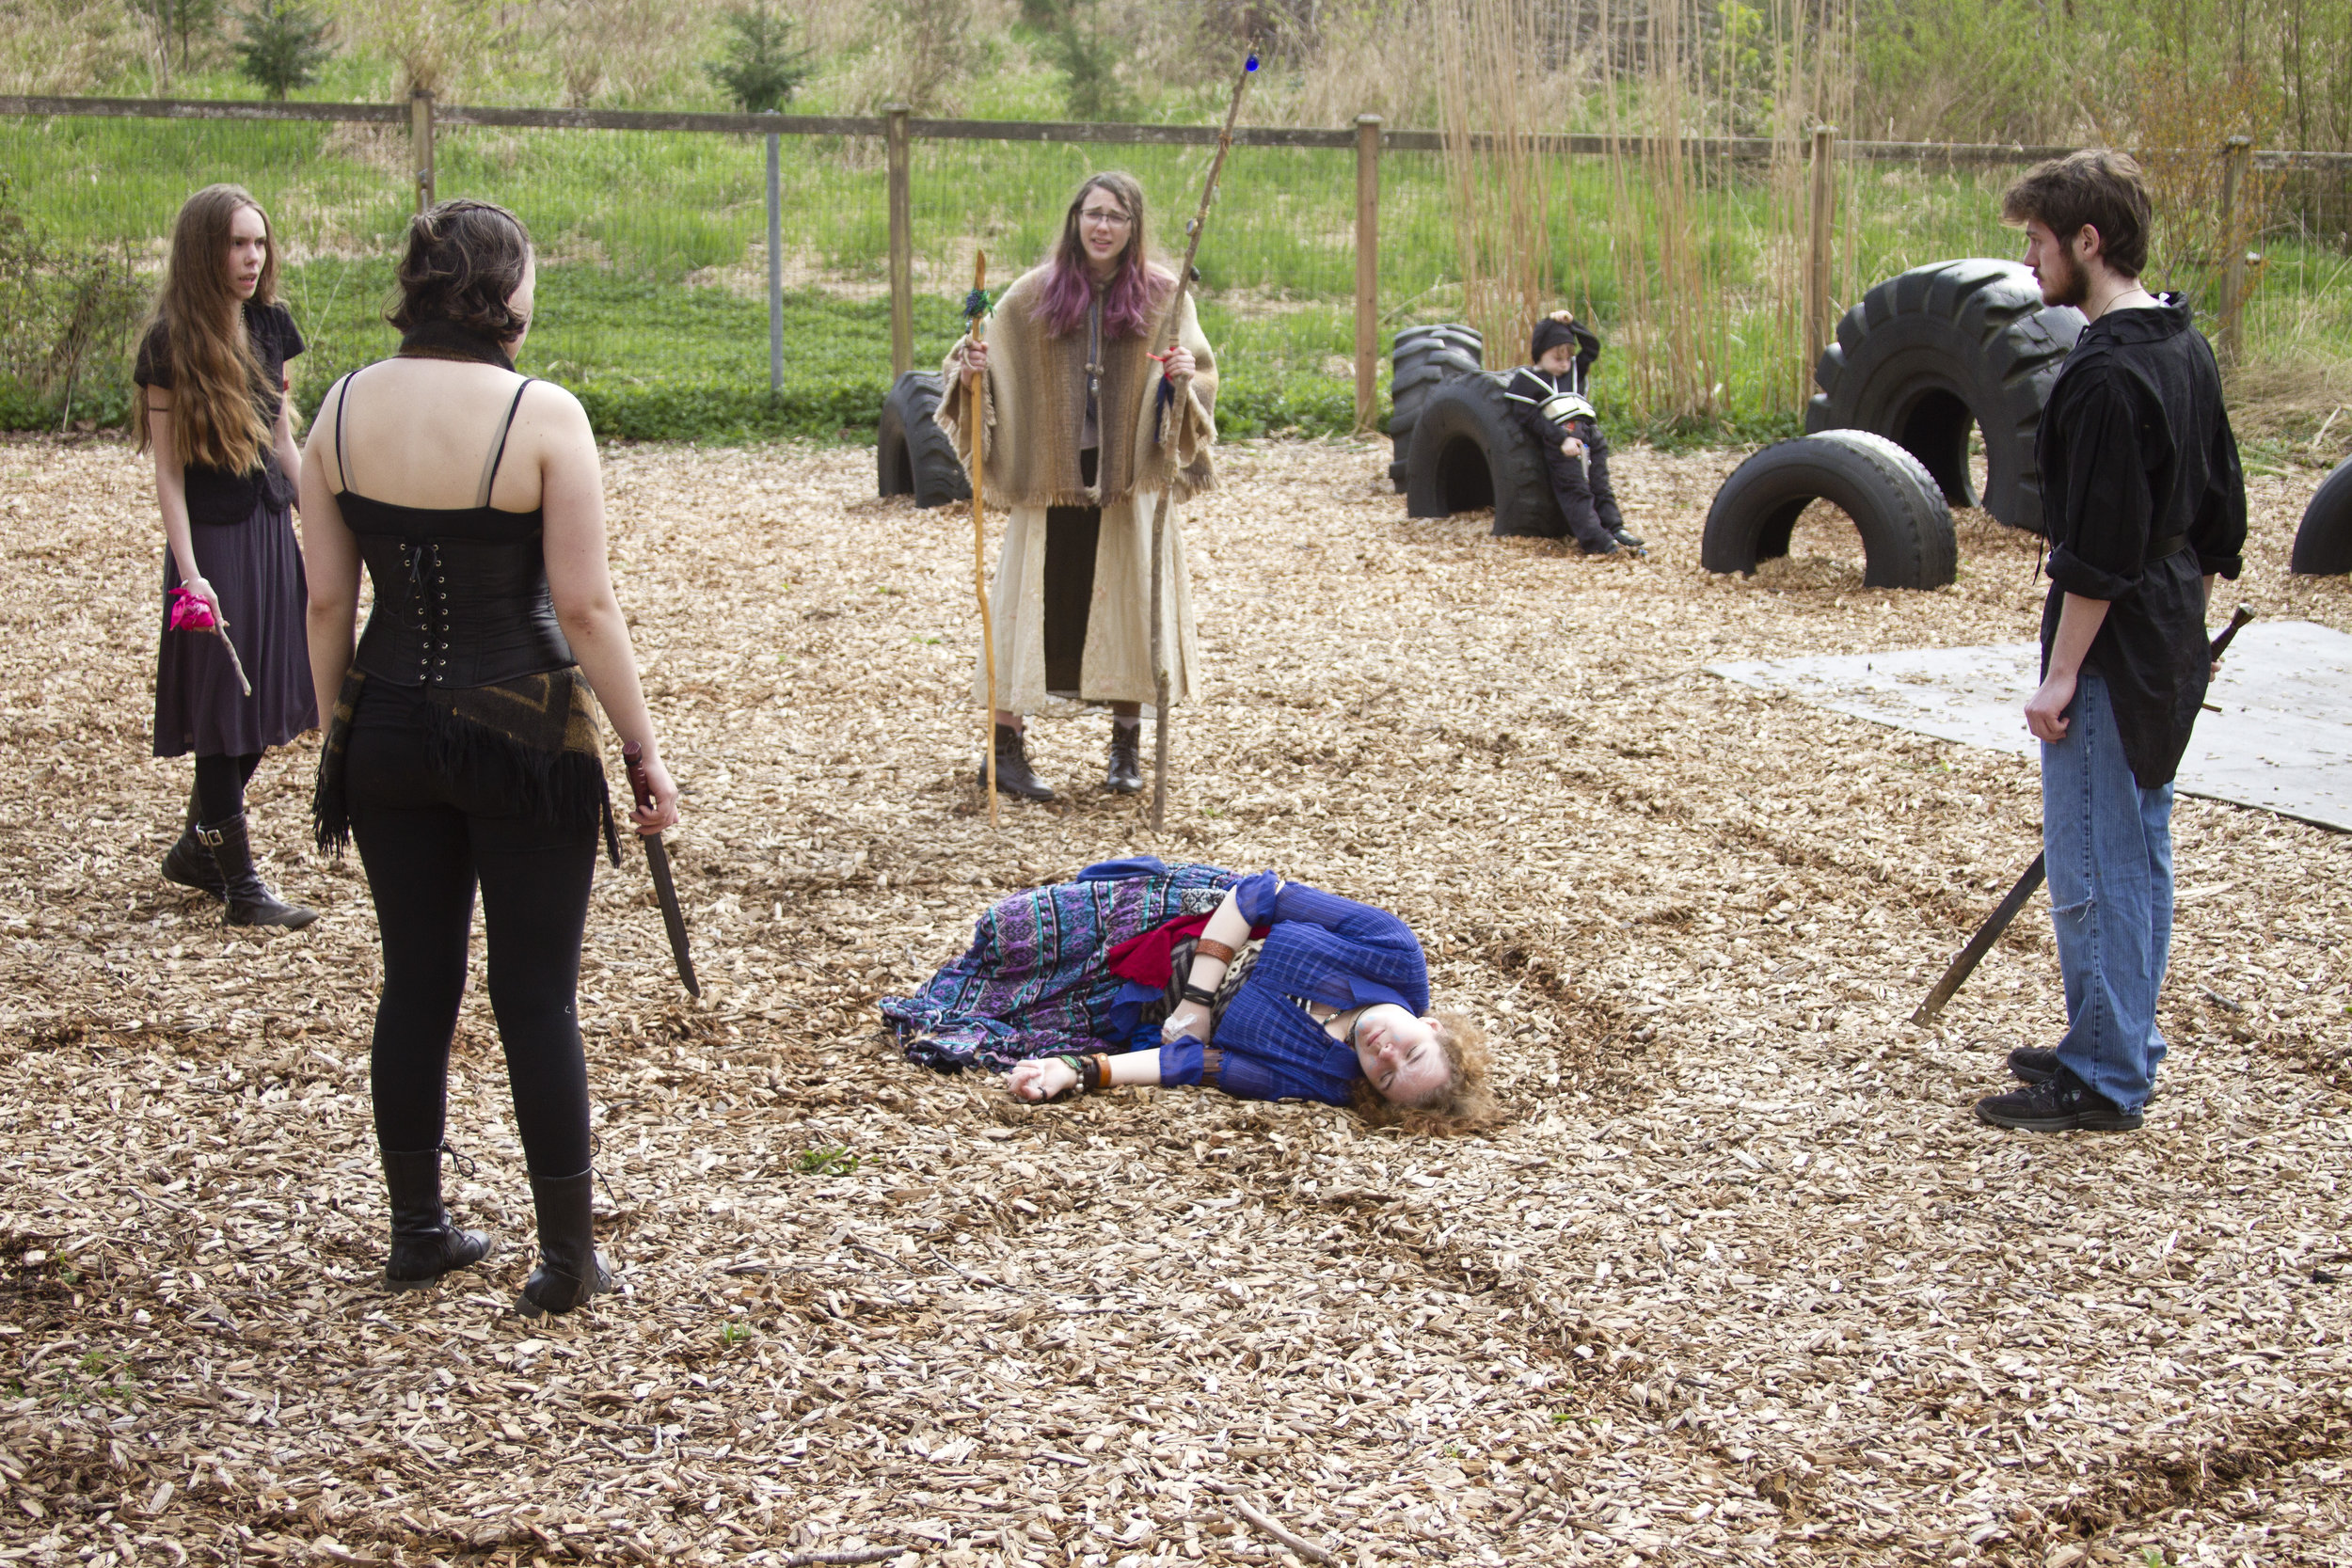 Group of students engaging in a Live Action Roleplaying Game.